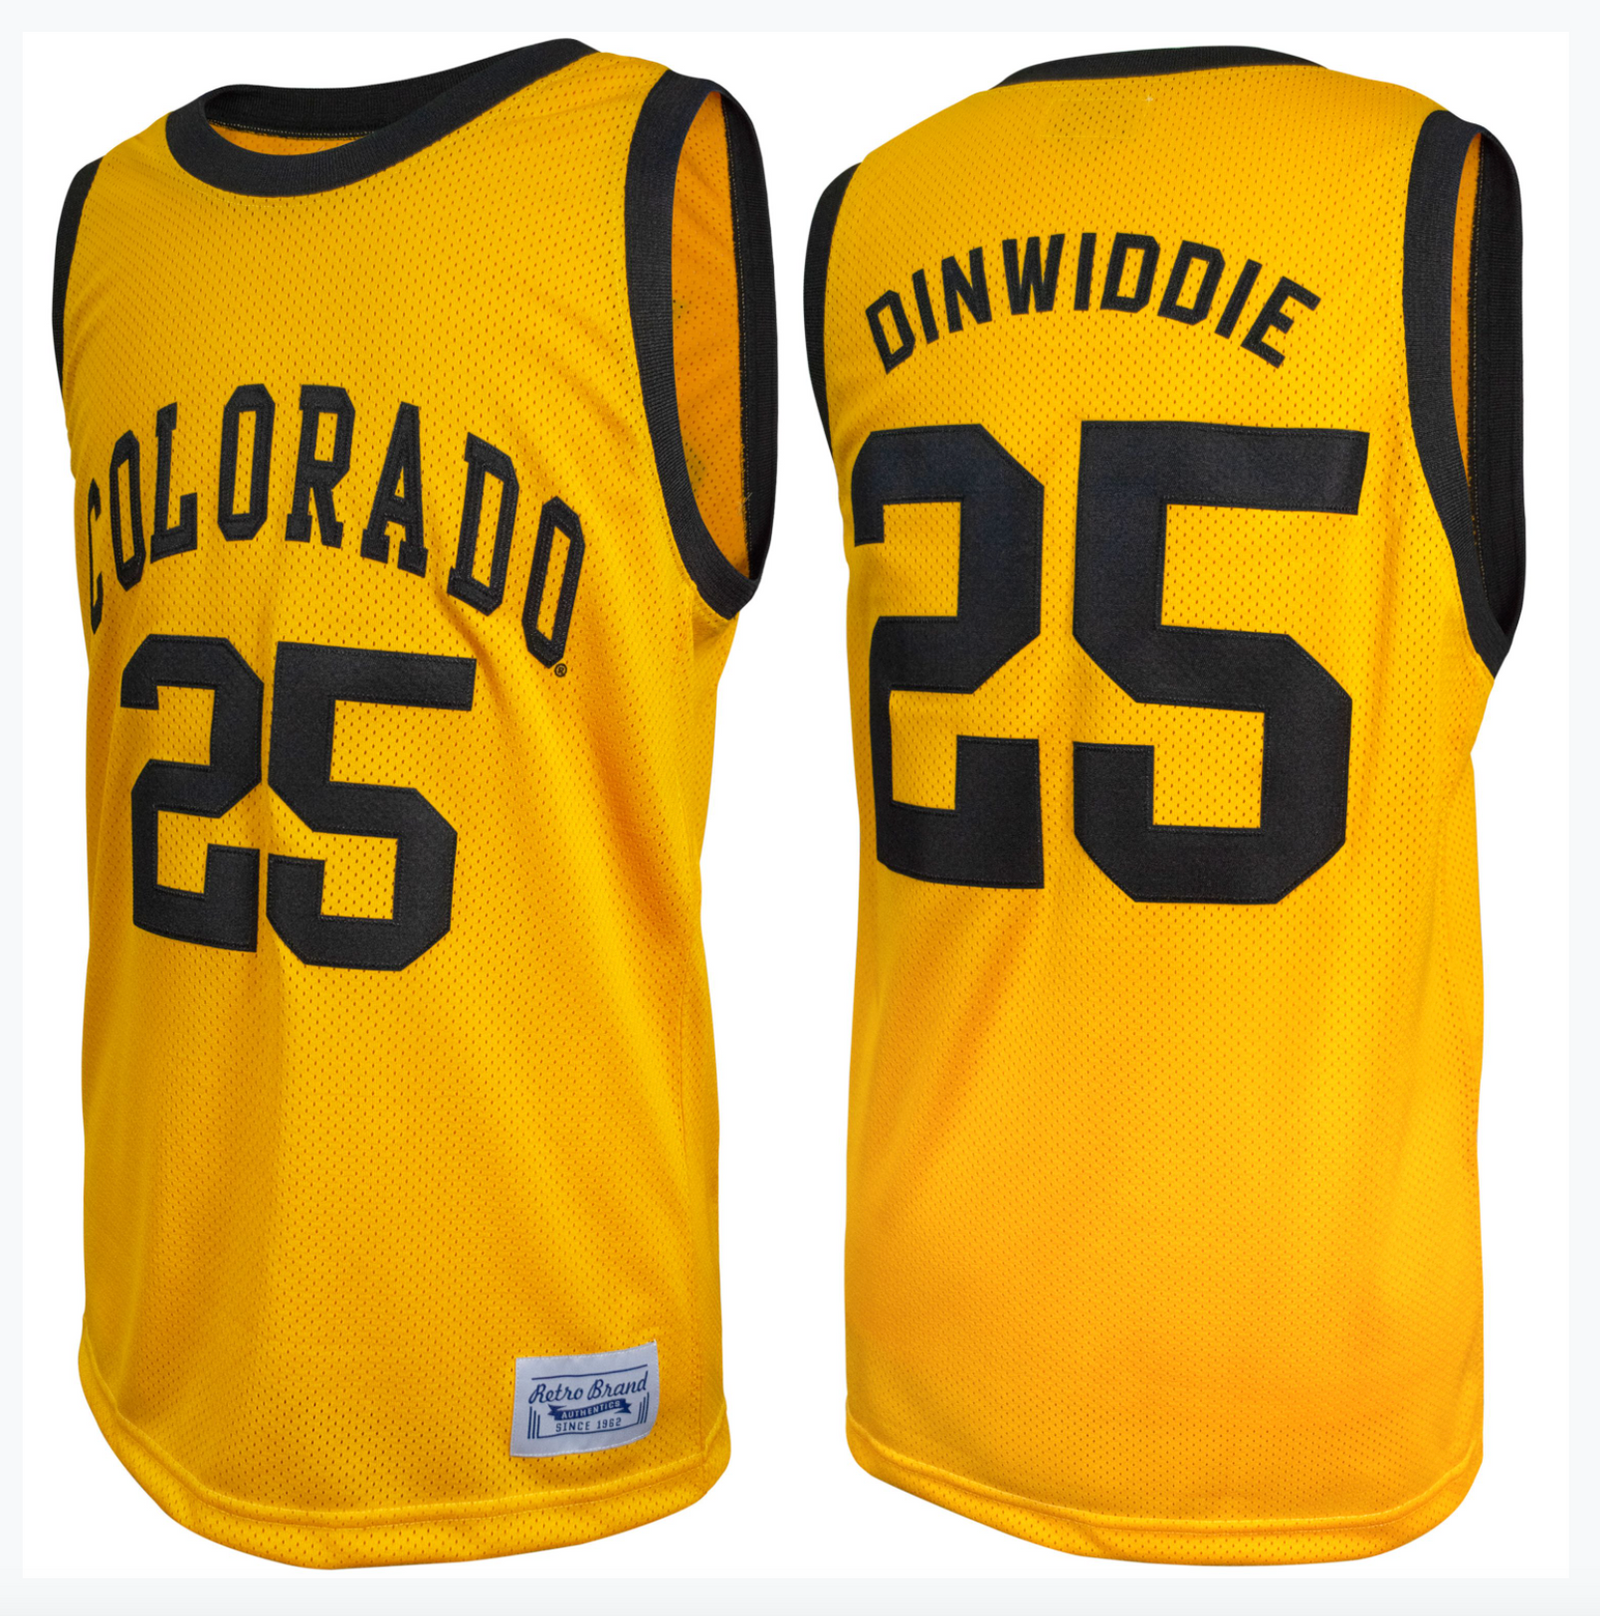 NBA Throwback Jersey Gift Guide For All 30 Teams - Page 25